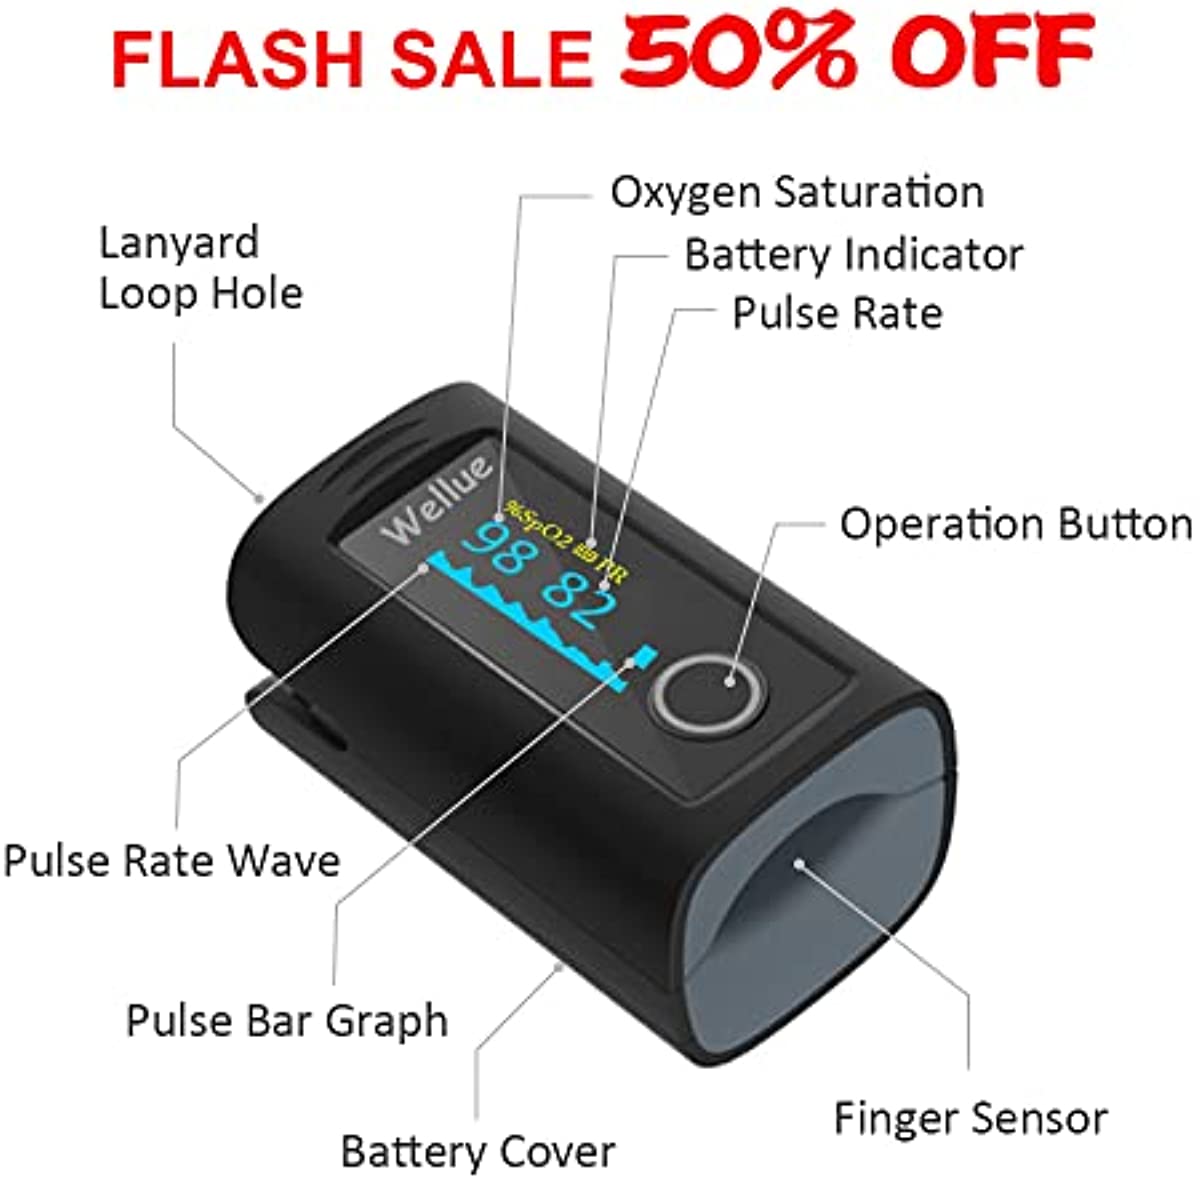 Wellue Bluetooth Pulse Oximeter Fingertip PC-60FW, Blood Oxygen Saturation Monitor with Free APP, Batteries, Carry Bag & Lanyard